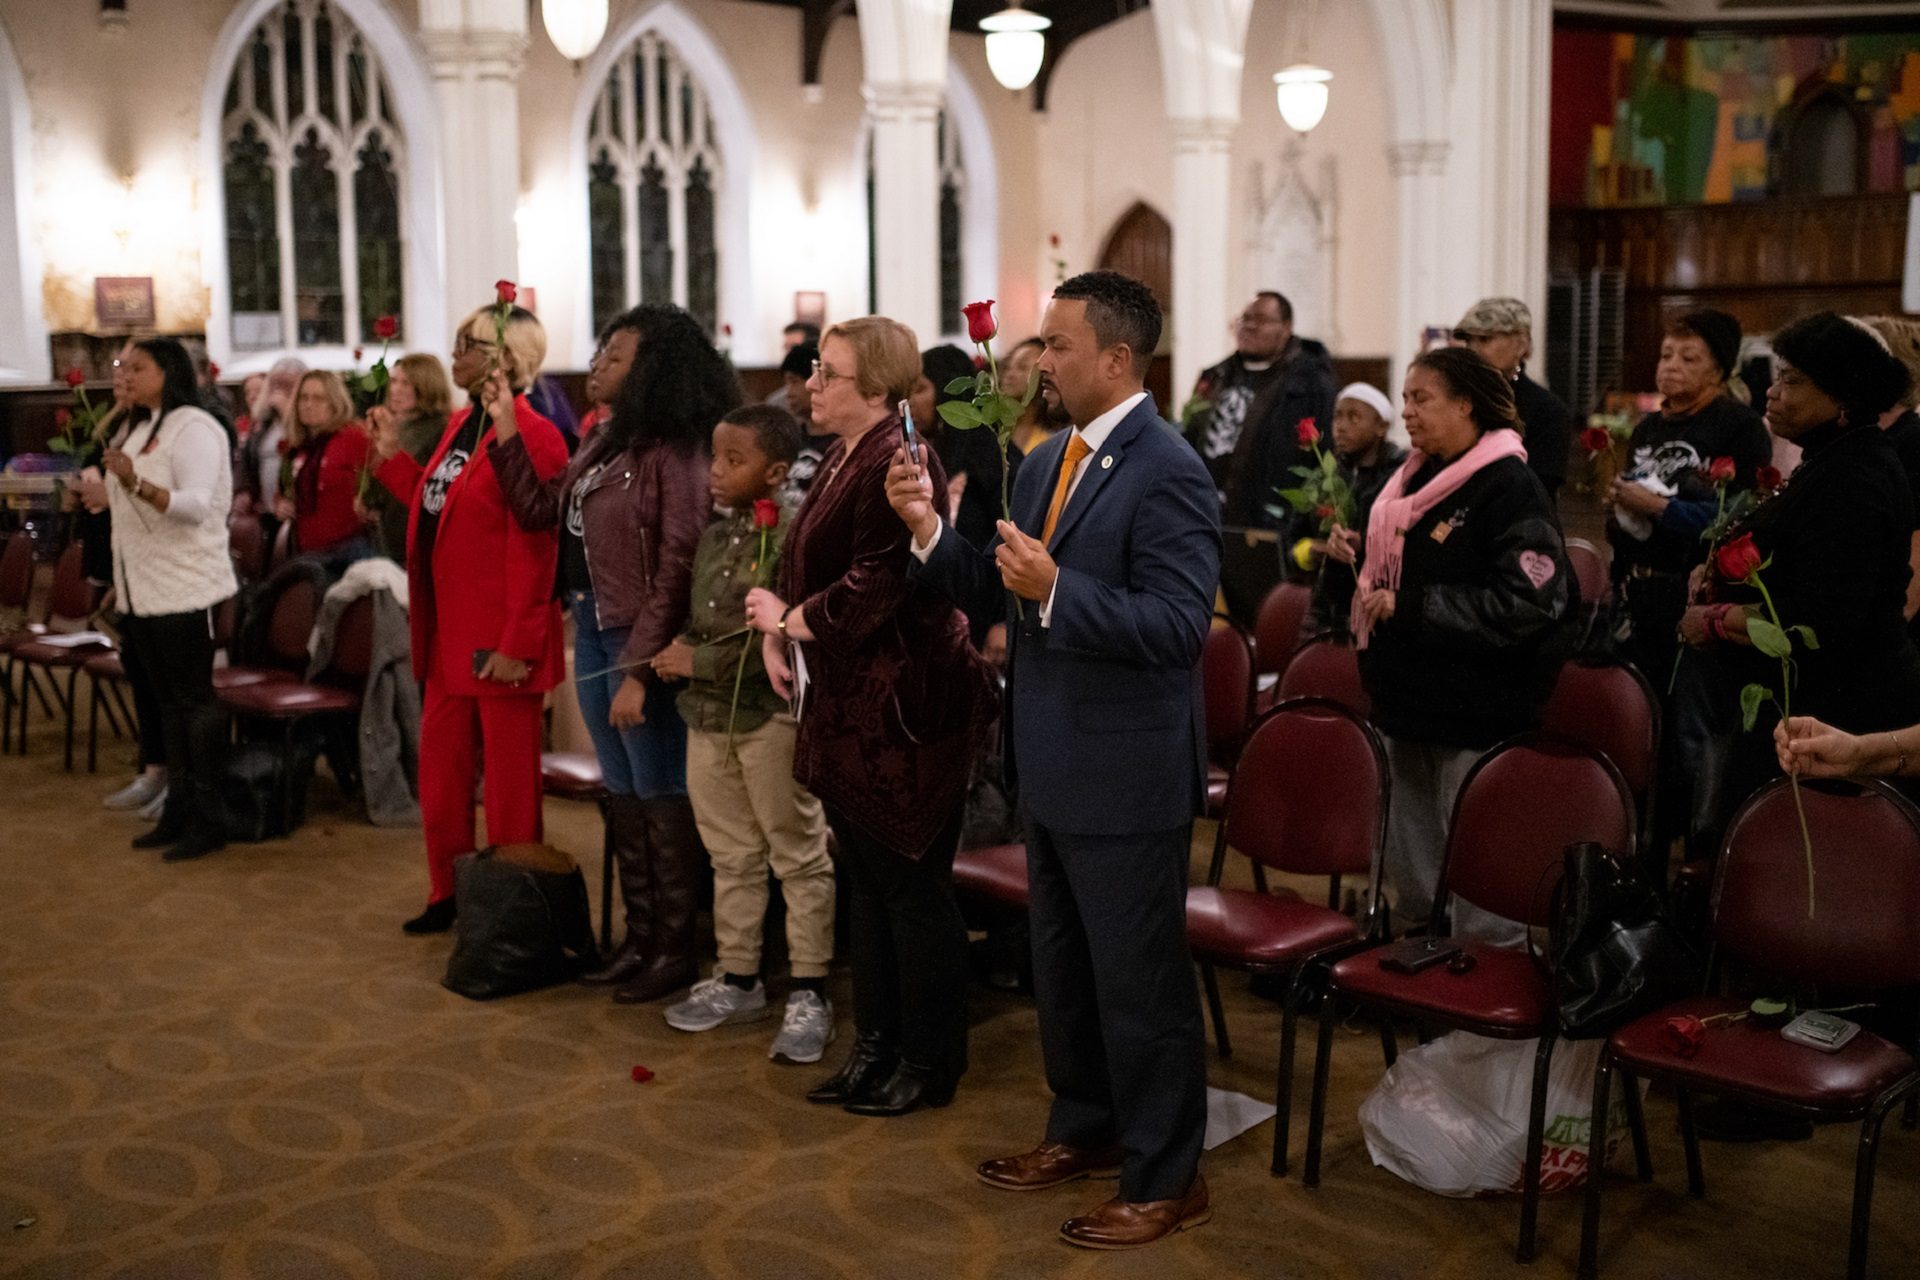 A group gathered to remember gun violence victims stands, vowing not to stop pursuing change, during a vigil at Broad Street Ministry on Wednesday, December 11, 2019.